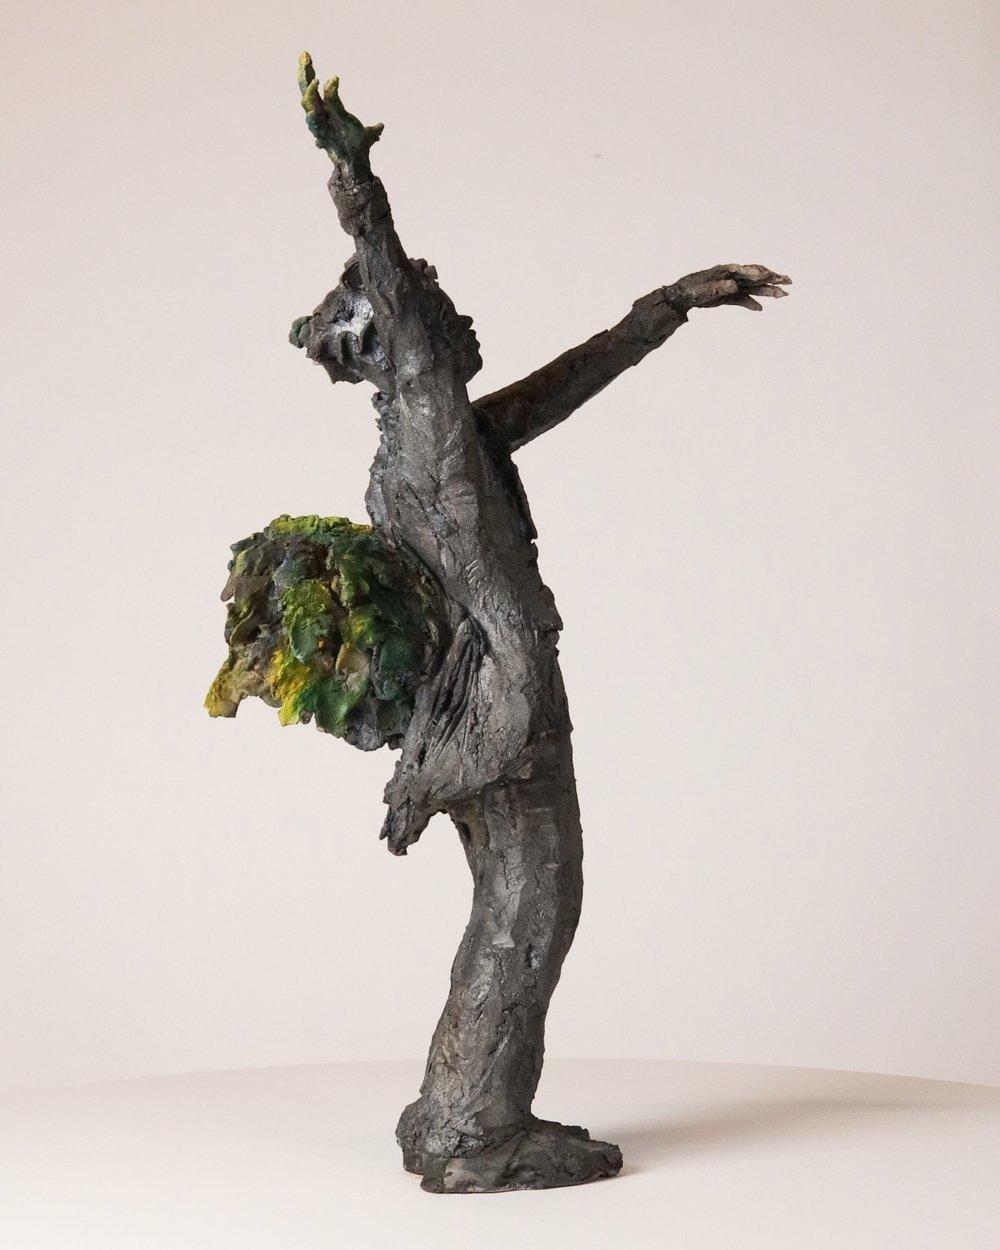 Birdcatcher by Cécile Raynal - Standing male figure, ceramic sculpture For Sale 1